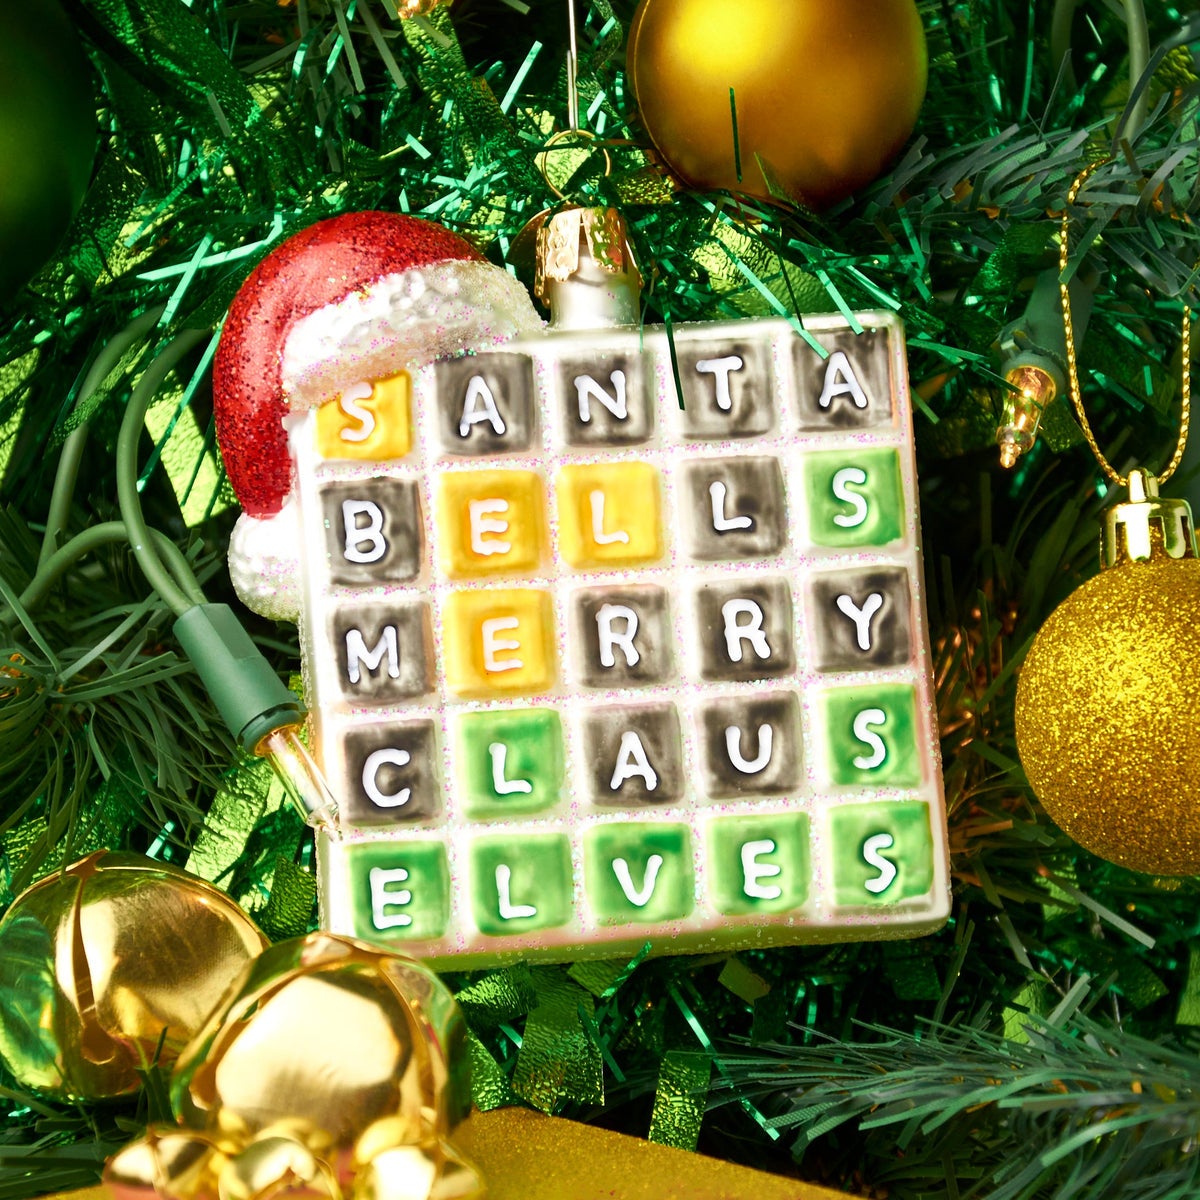 sparkly ornament that looks like wordle grid with a santa hat on top with guesses santa bells merry claus and elves